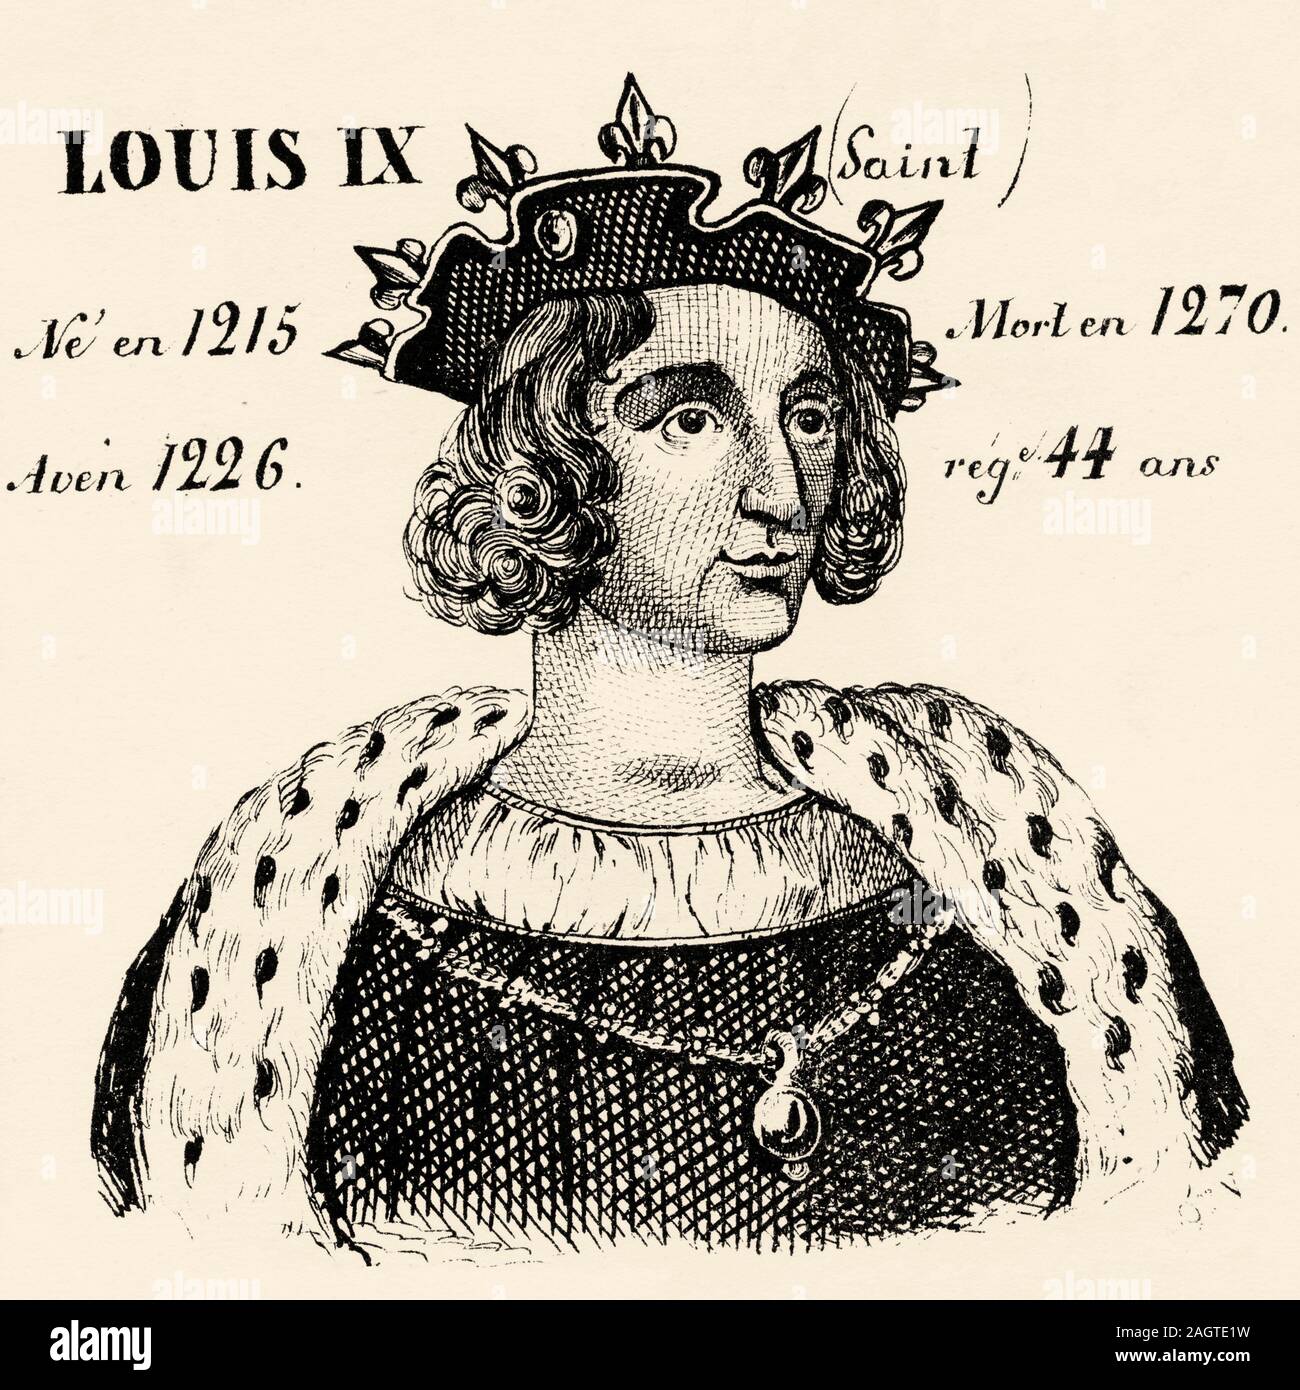 Portrait of Louis IX the Saint (1215 - 1270). King of France from 1226 to 1270. House of Capet, Direct Capetians or House of France.  History of Franc Stock Photo